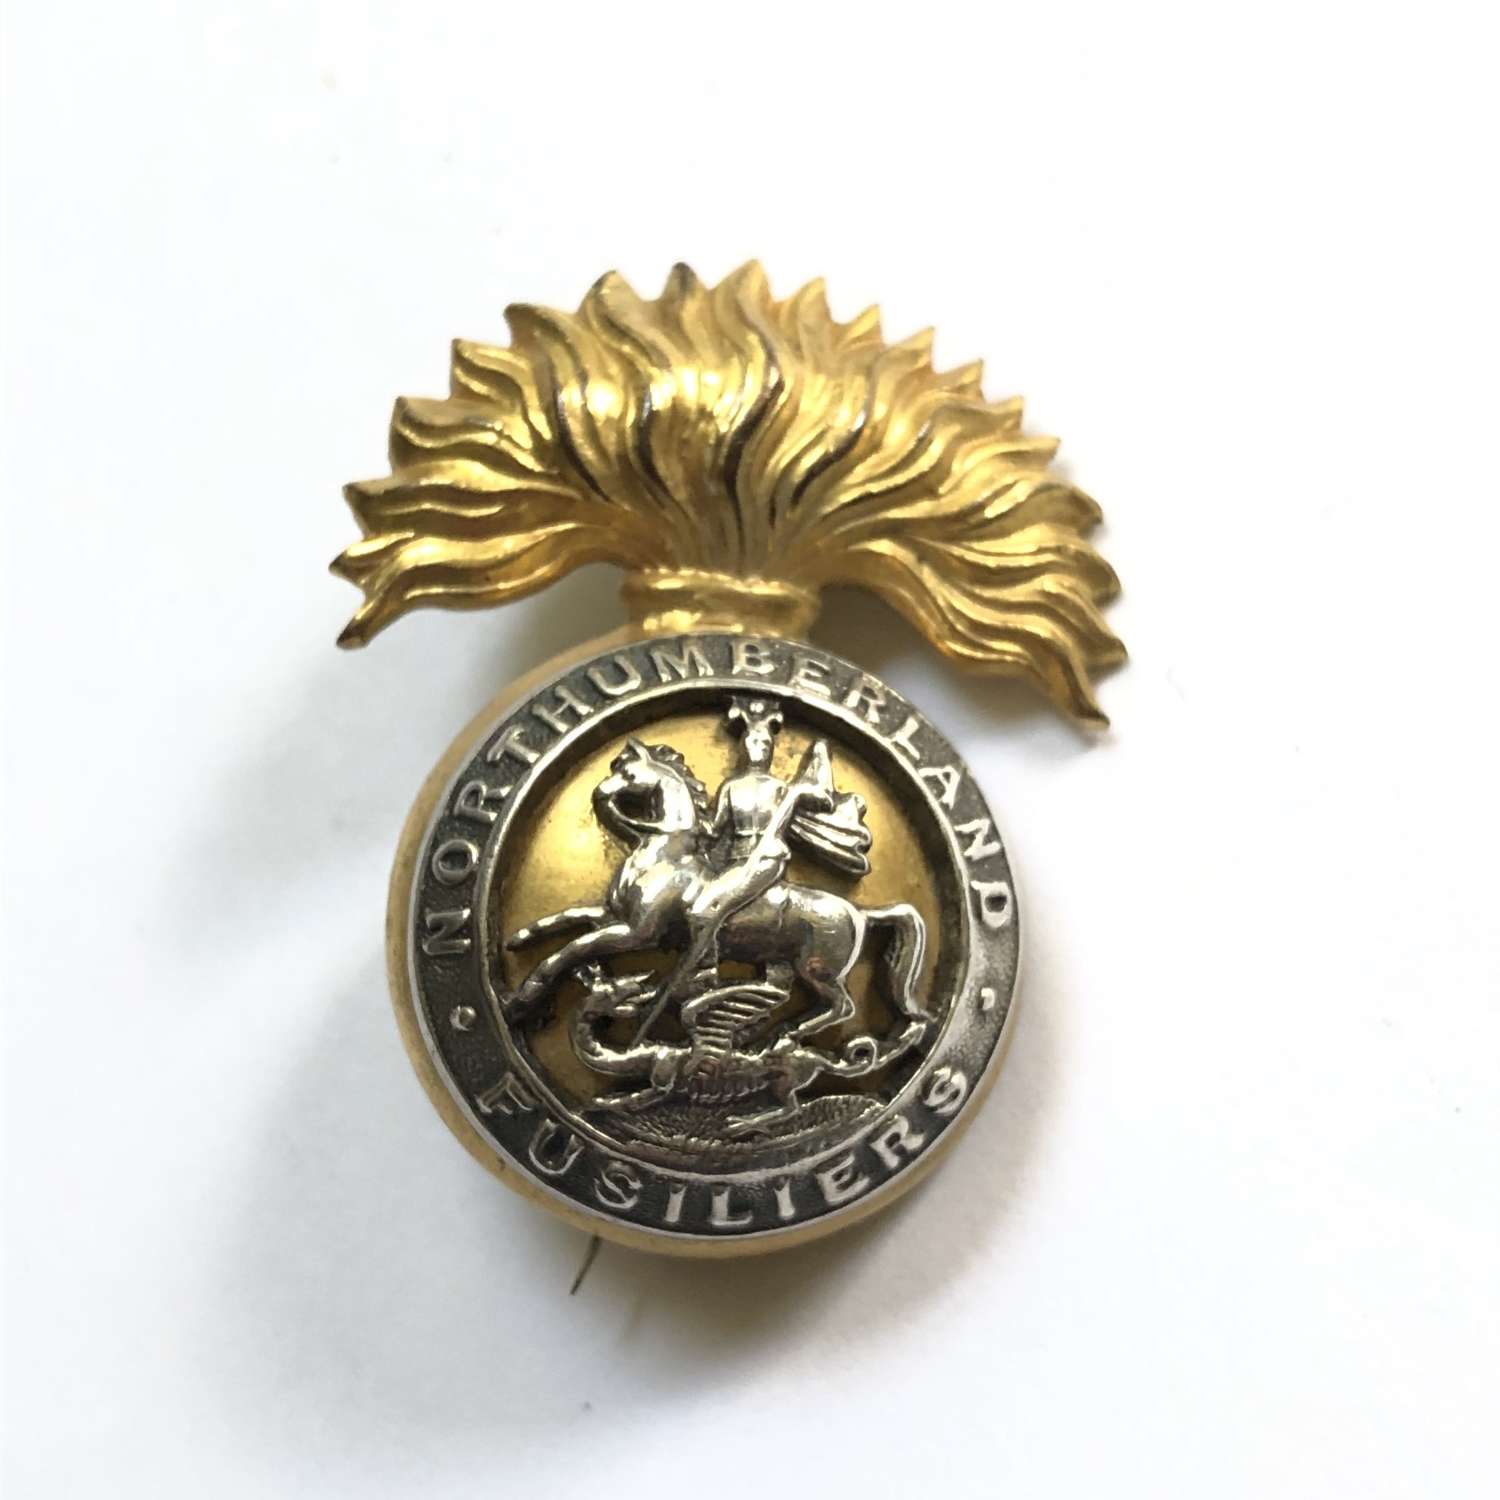 Northumberland Fusiliers pre 1935 Officer’s cap badge